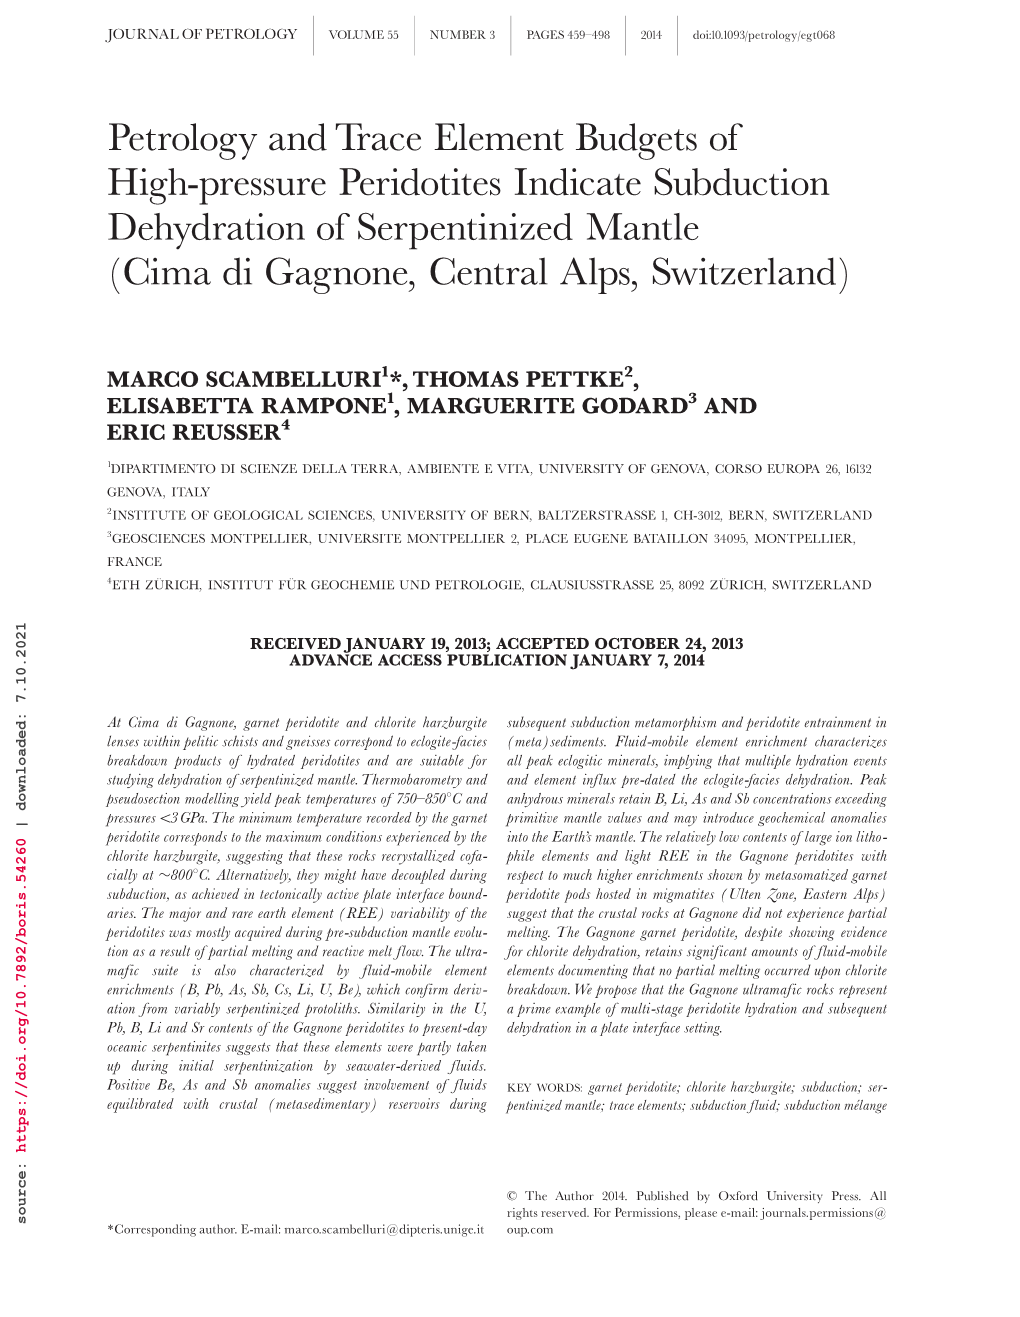 Petrology and Trace Element Budgets of High-Pressure Peridotites